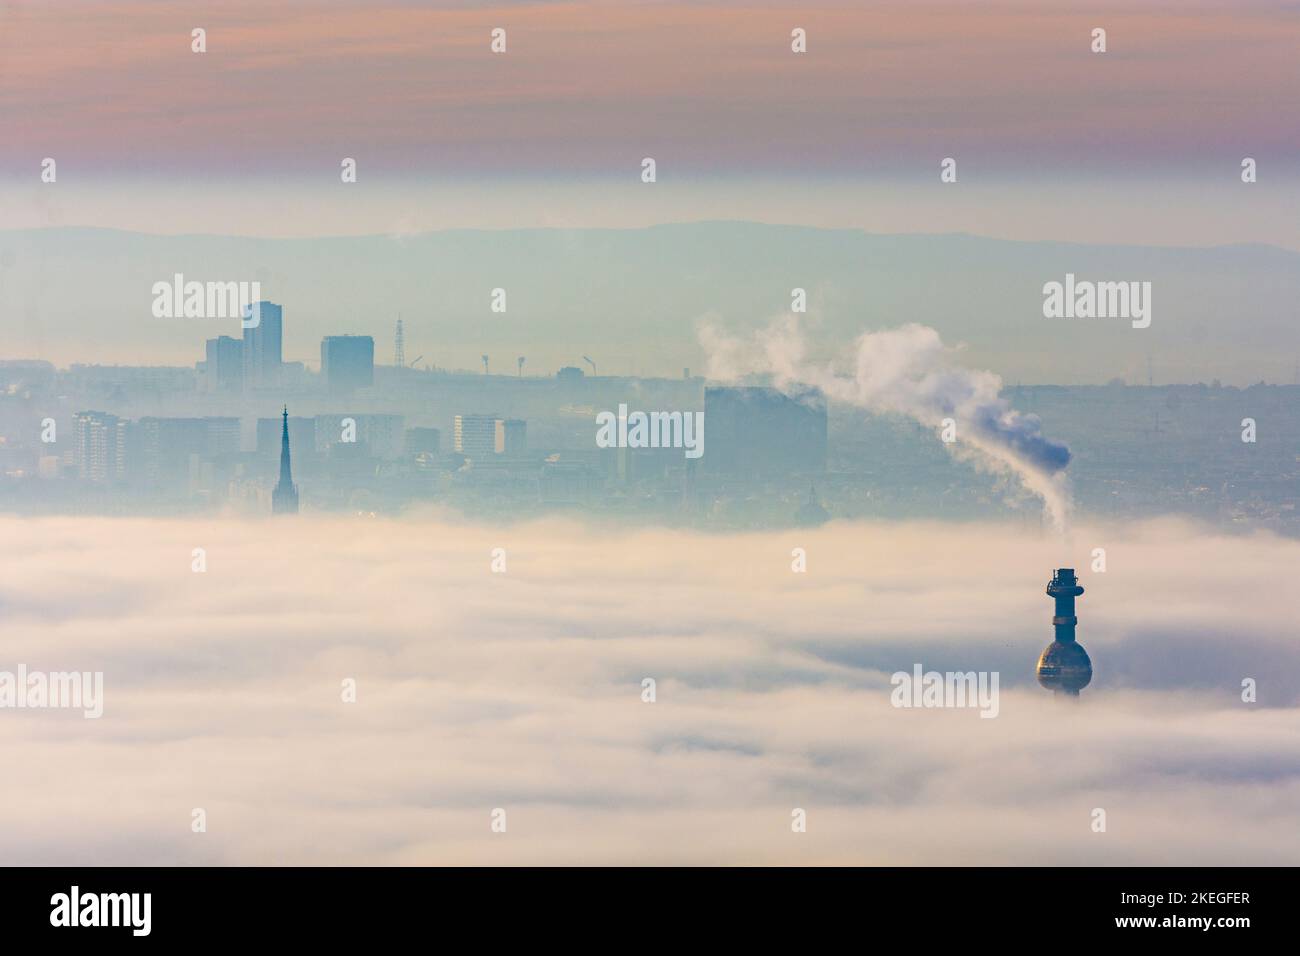 Wien, Vienna: towers stick out from ground fog, steeple of Stephansdom (St. Stephen's Cathedral), chimney of Spittelau waste incineration plant mornin Stock Photo